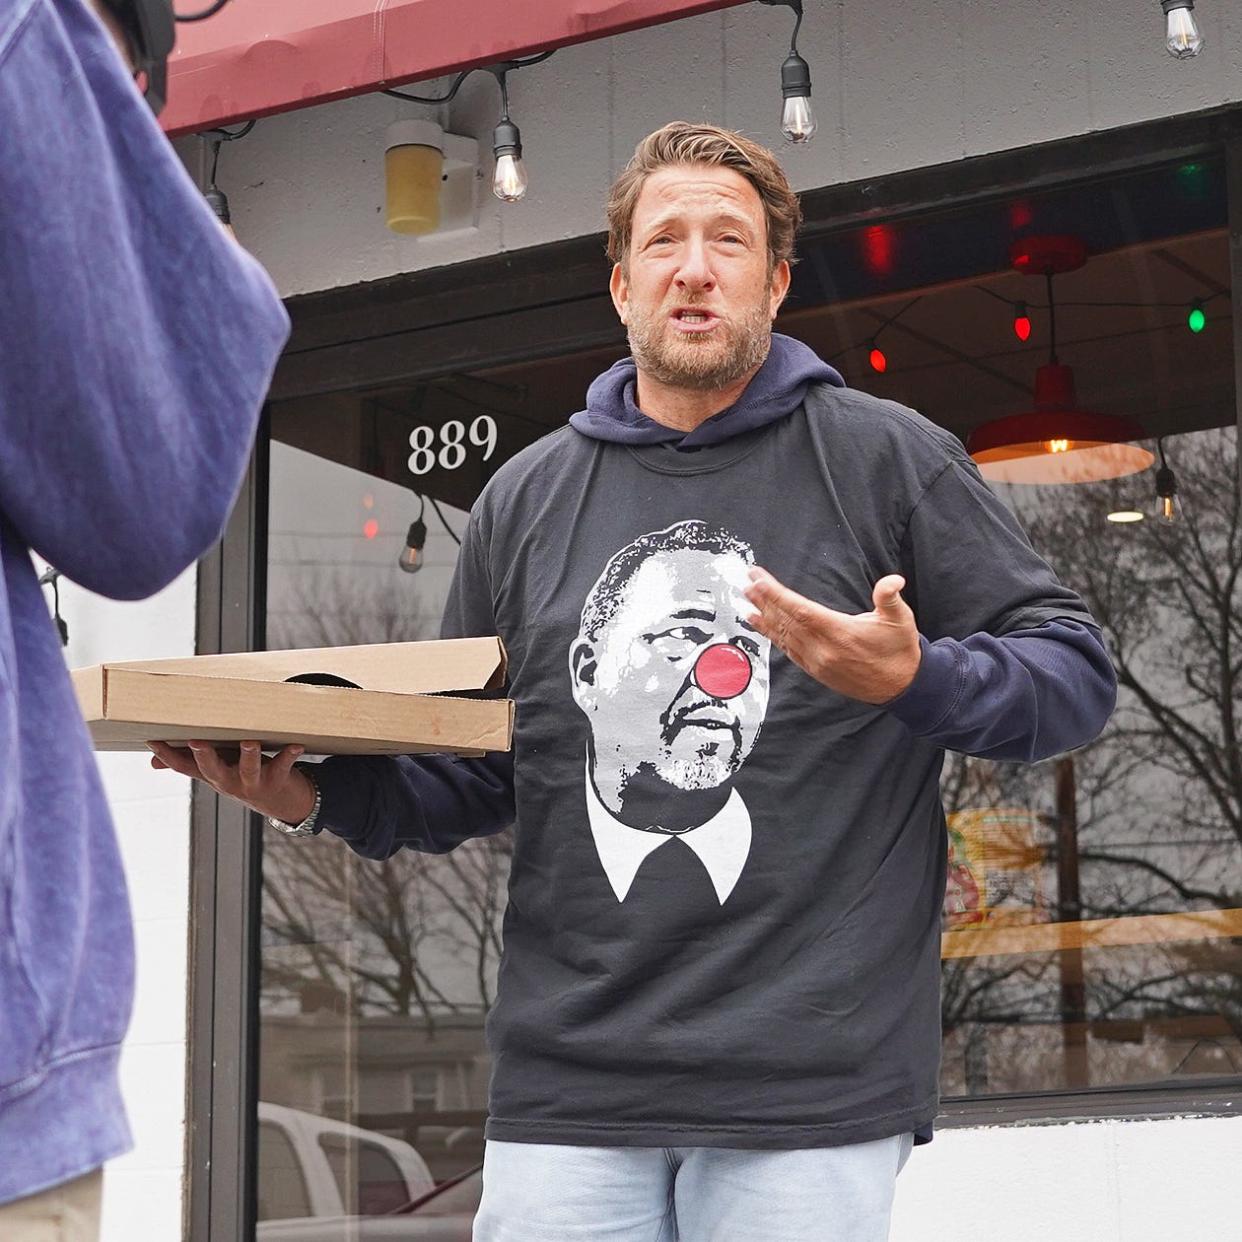 Barstool Sports founder and pizza influencer Dave Portnoy went on a four-trip pizza journey in Rhode Island Thursday, starting at Merlino's in Cranston.